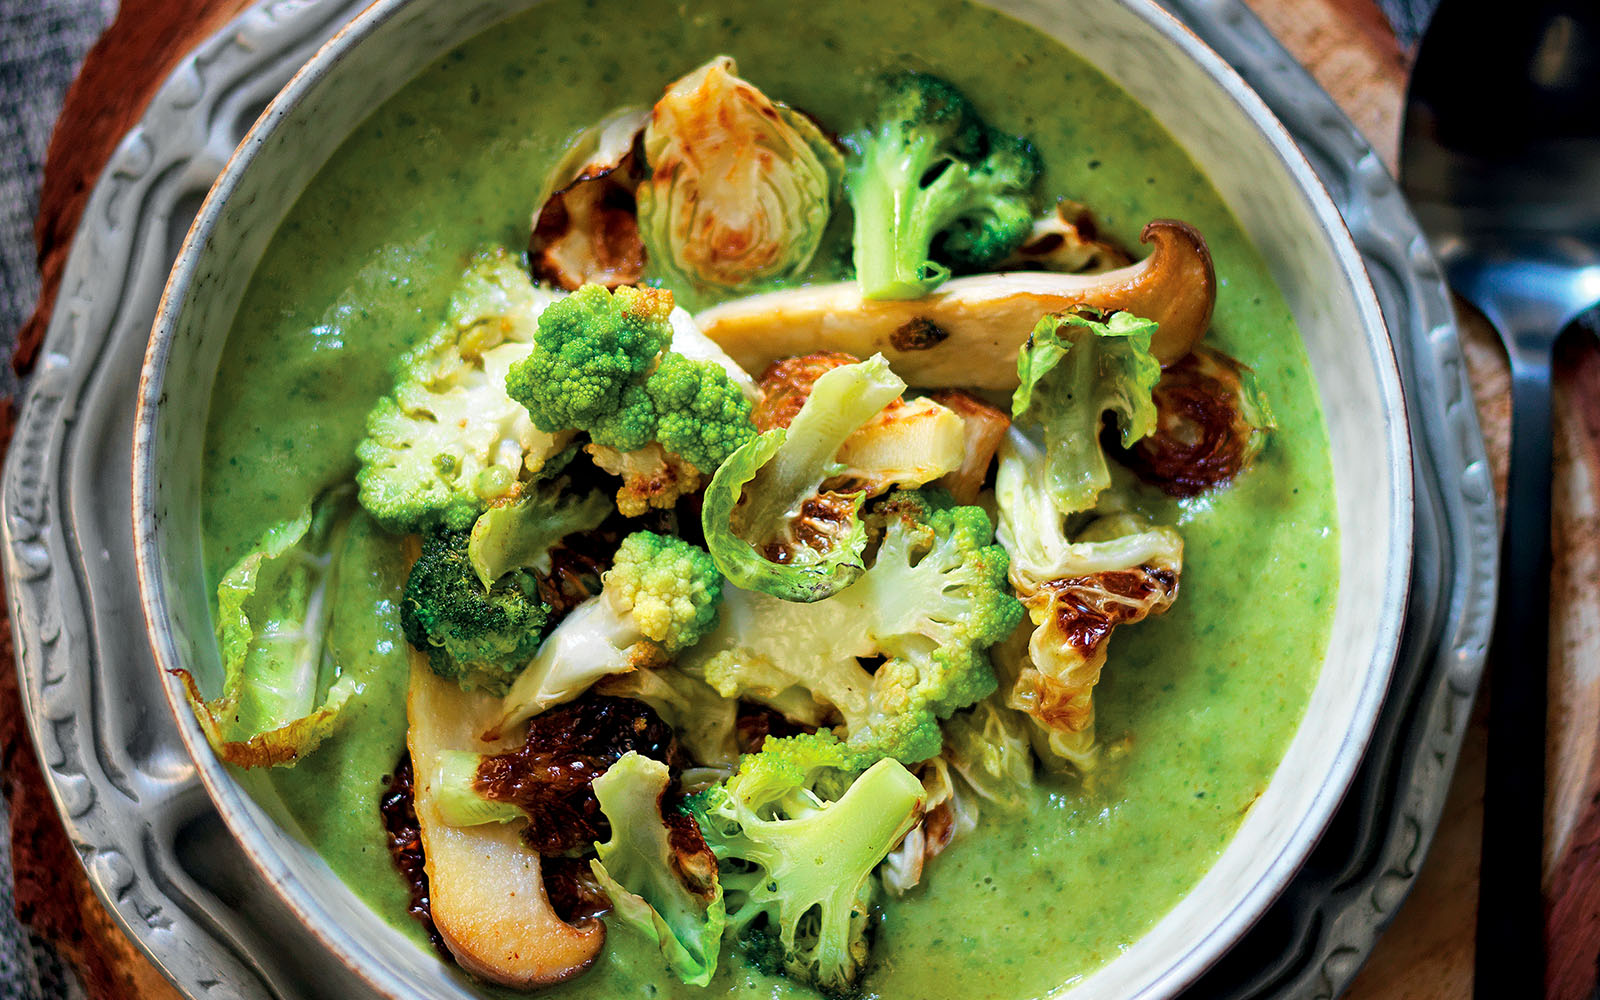 Recipe Broccoli cream with mixed cabbage and other vegetables